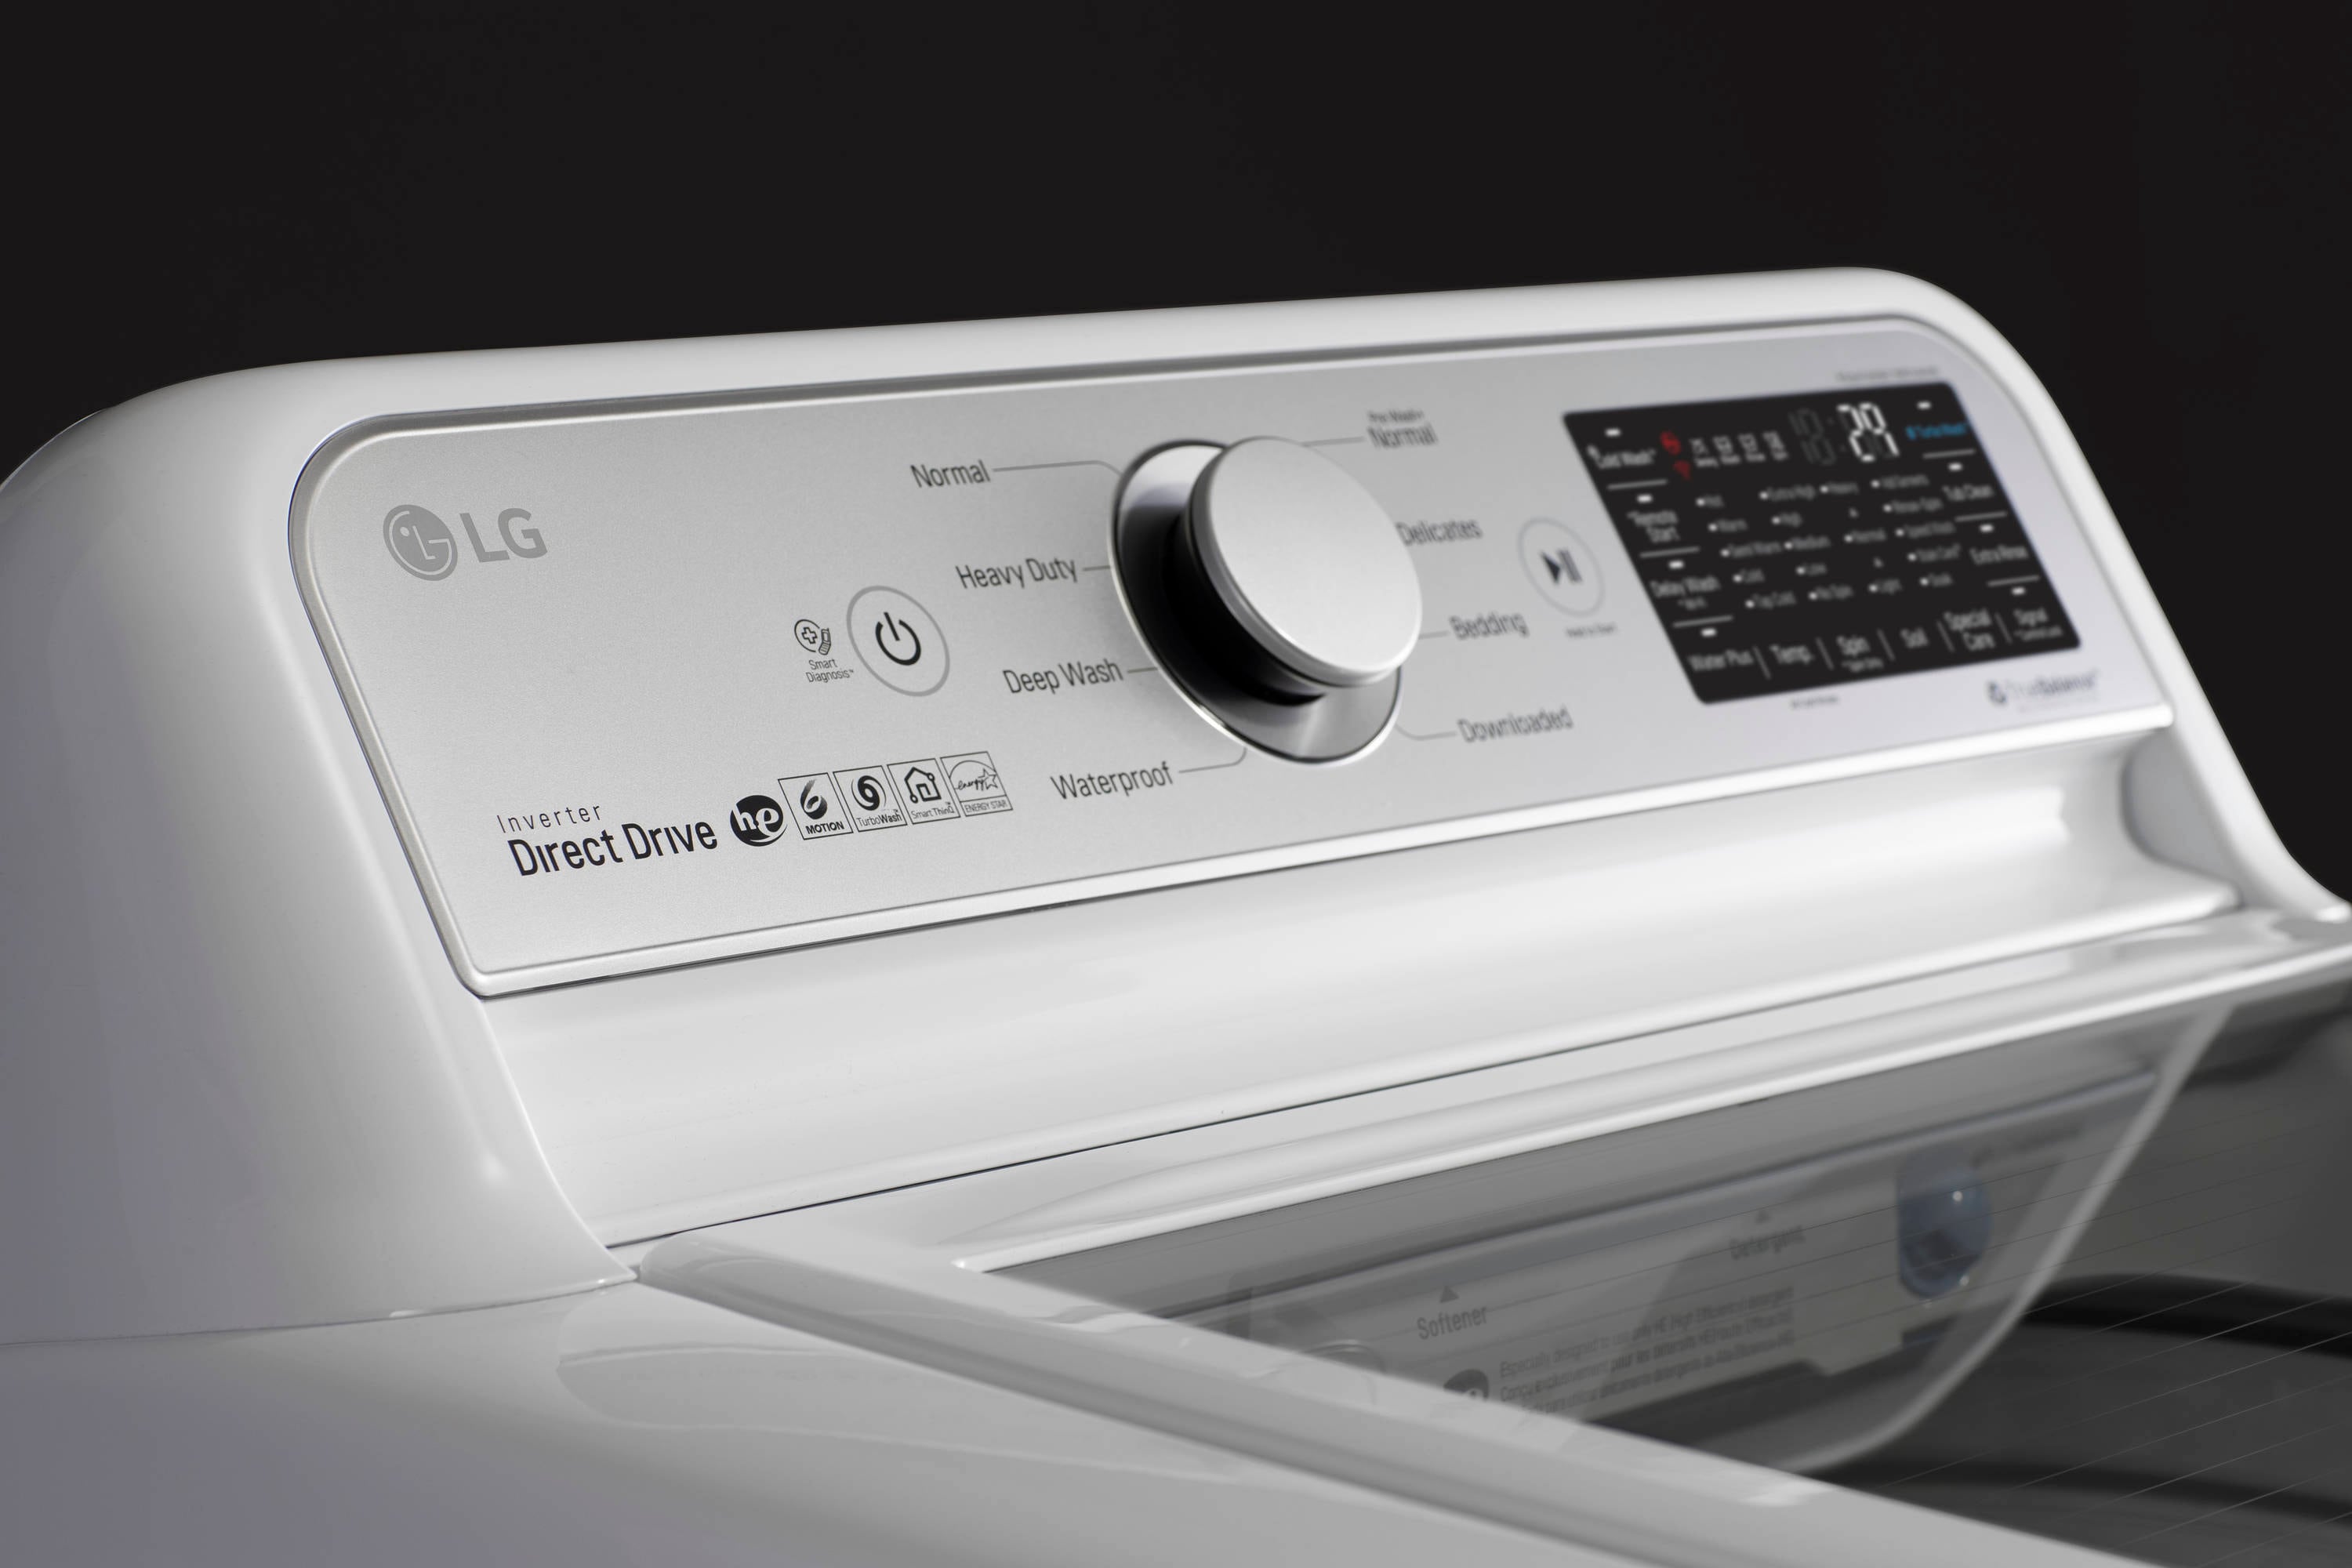 LG WT7300CW Top Load Washer Review - Reviewed